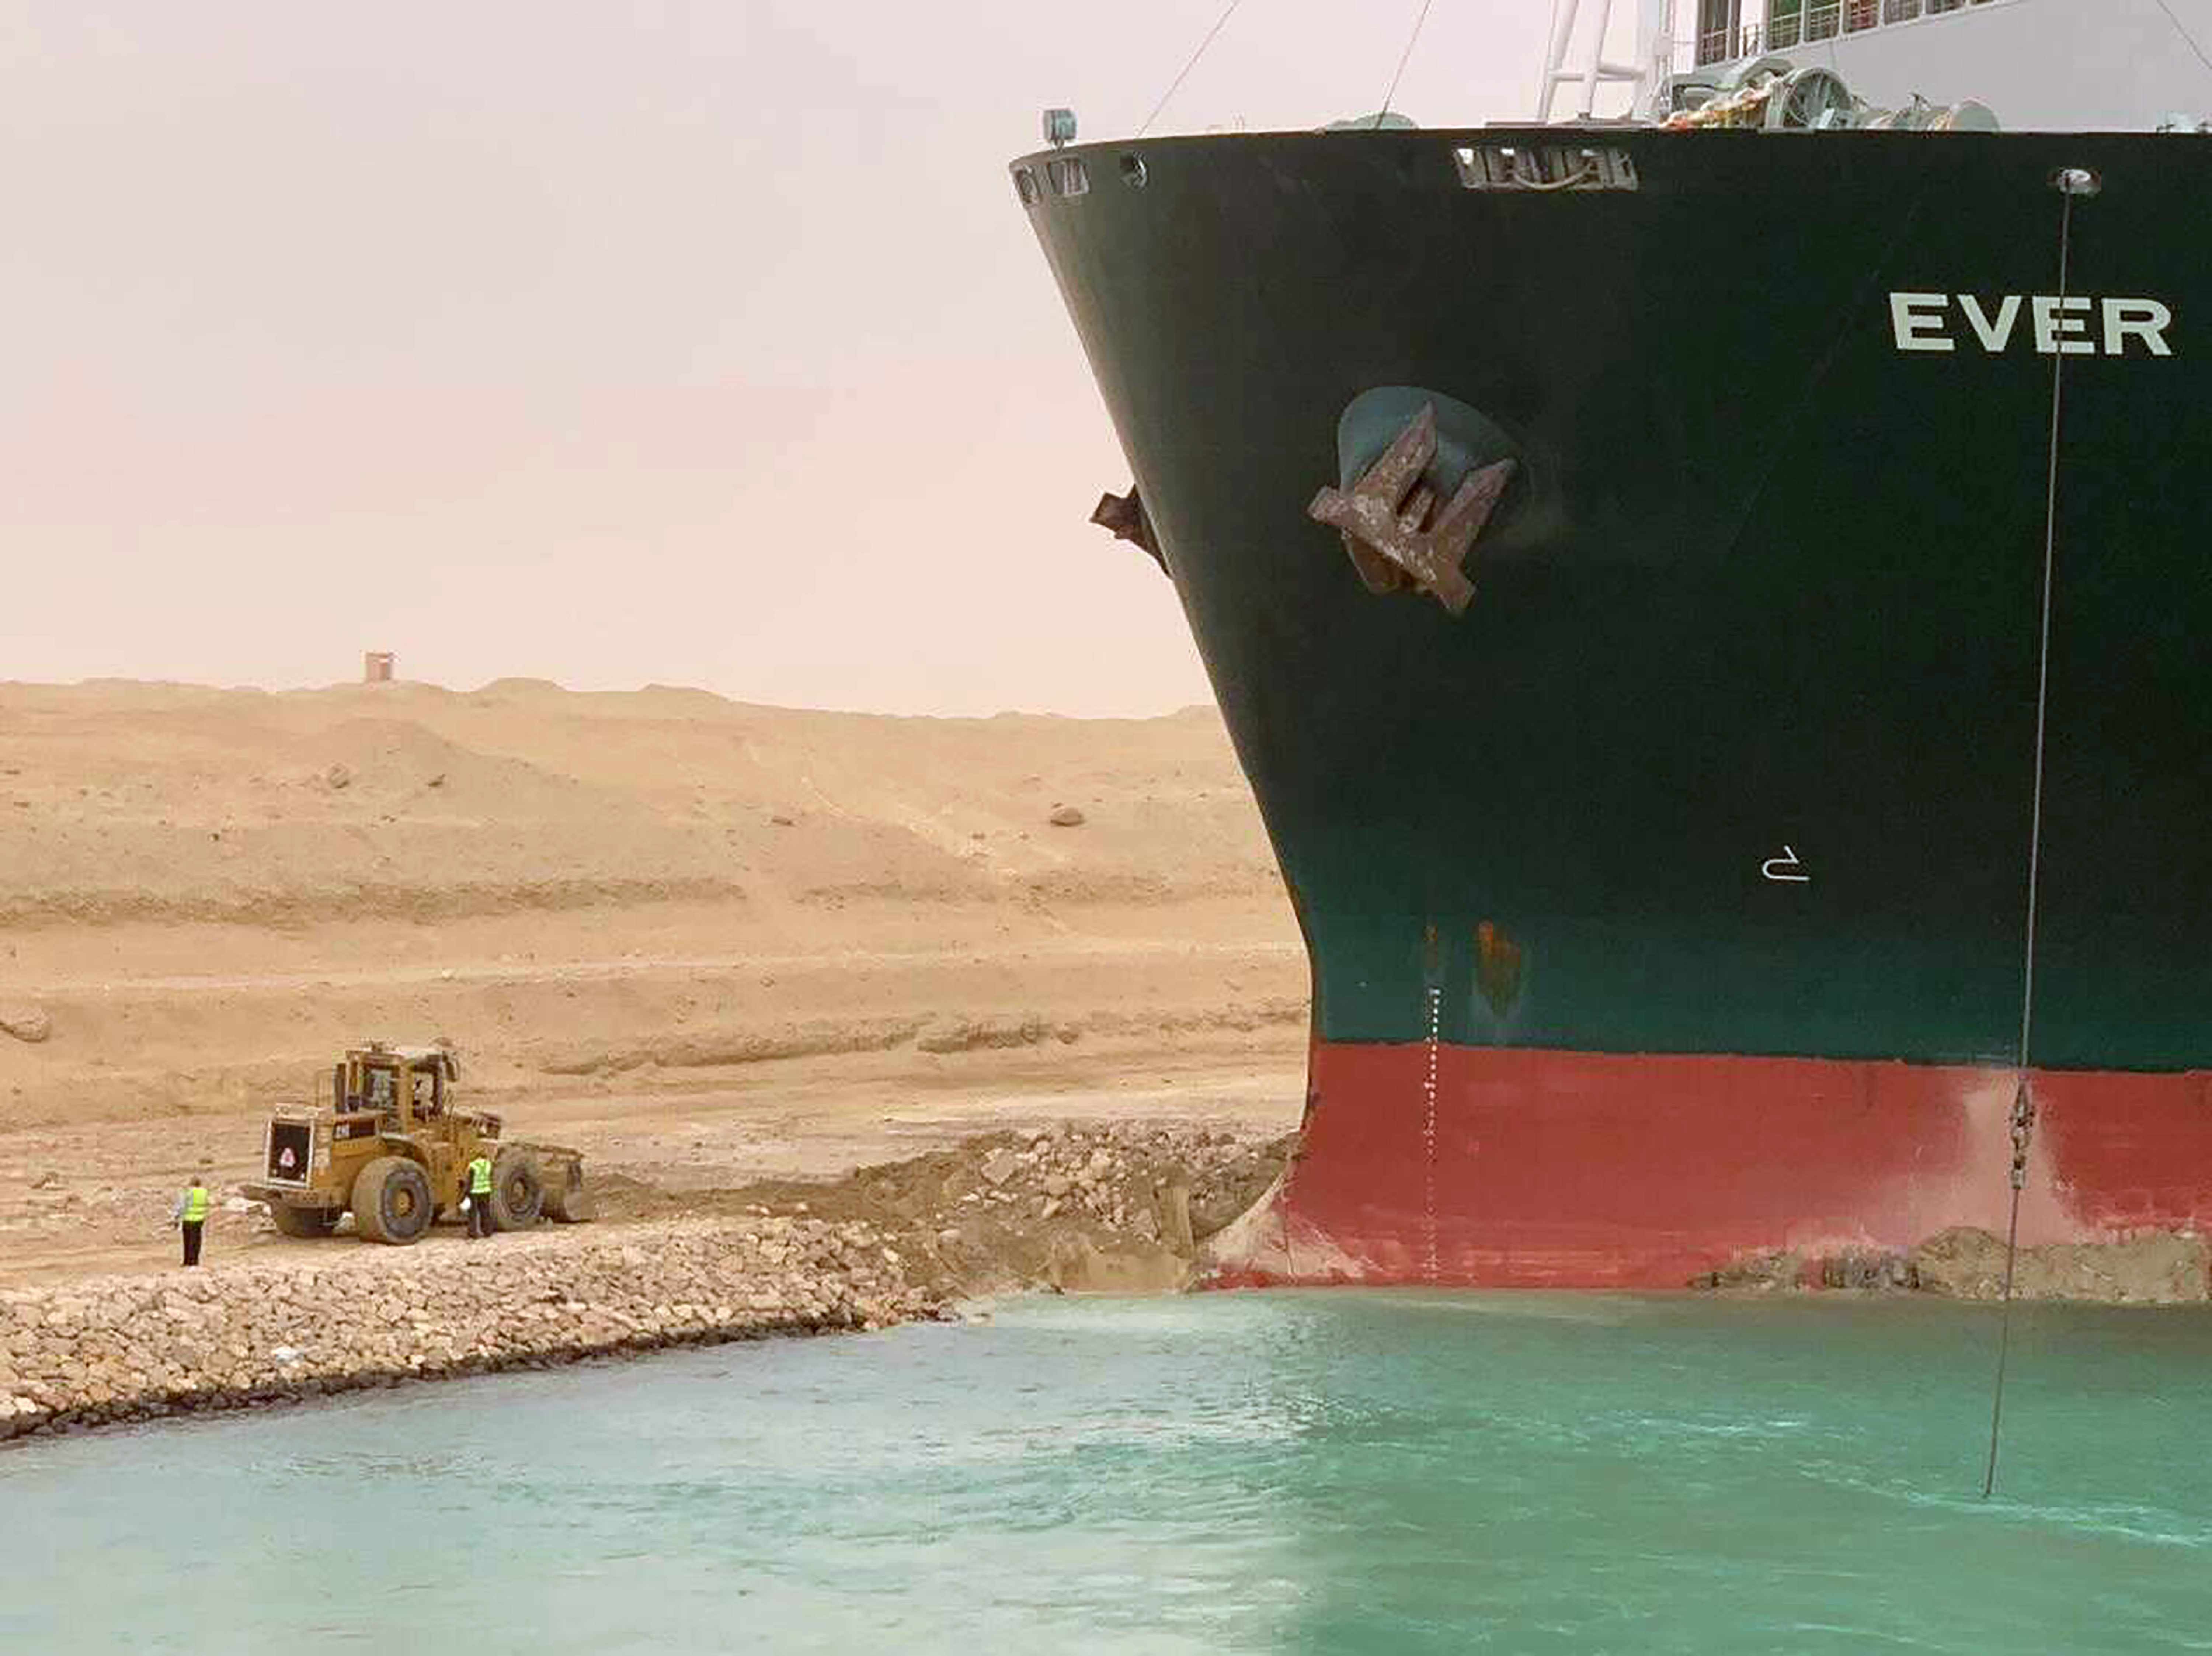 The photos show the container ship stranded in the Suez Canal